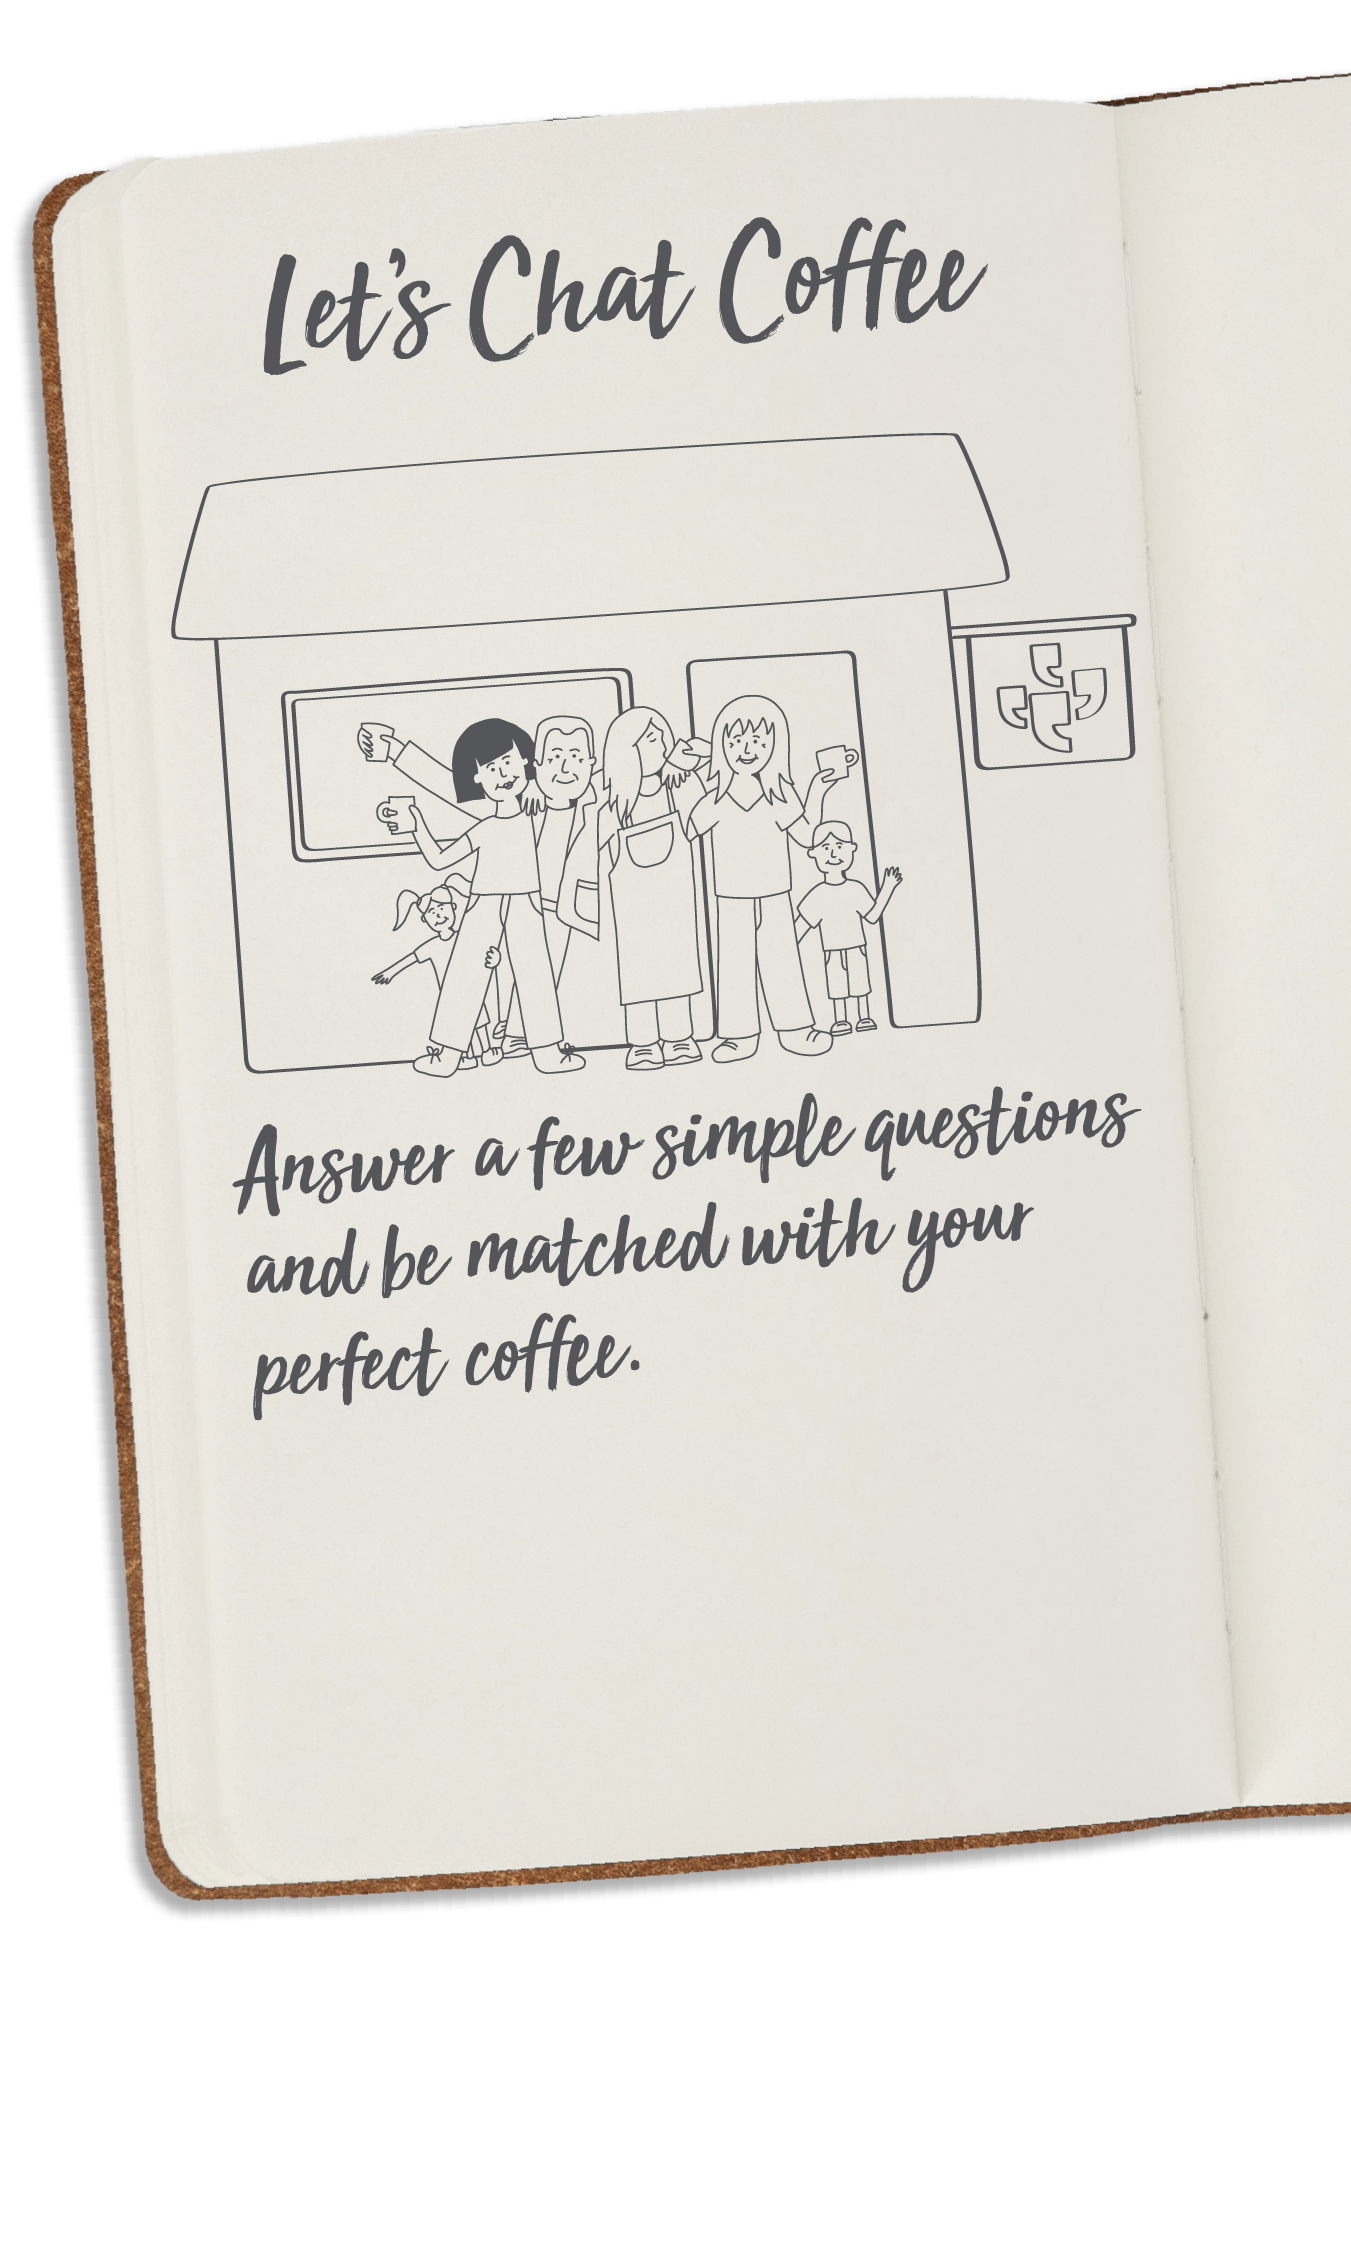 "Lets Chat Coffee" on a page of a book